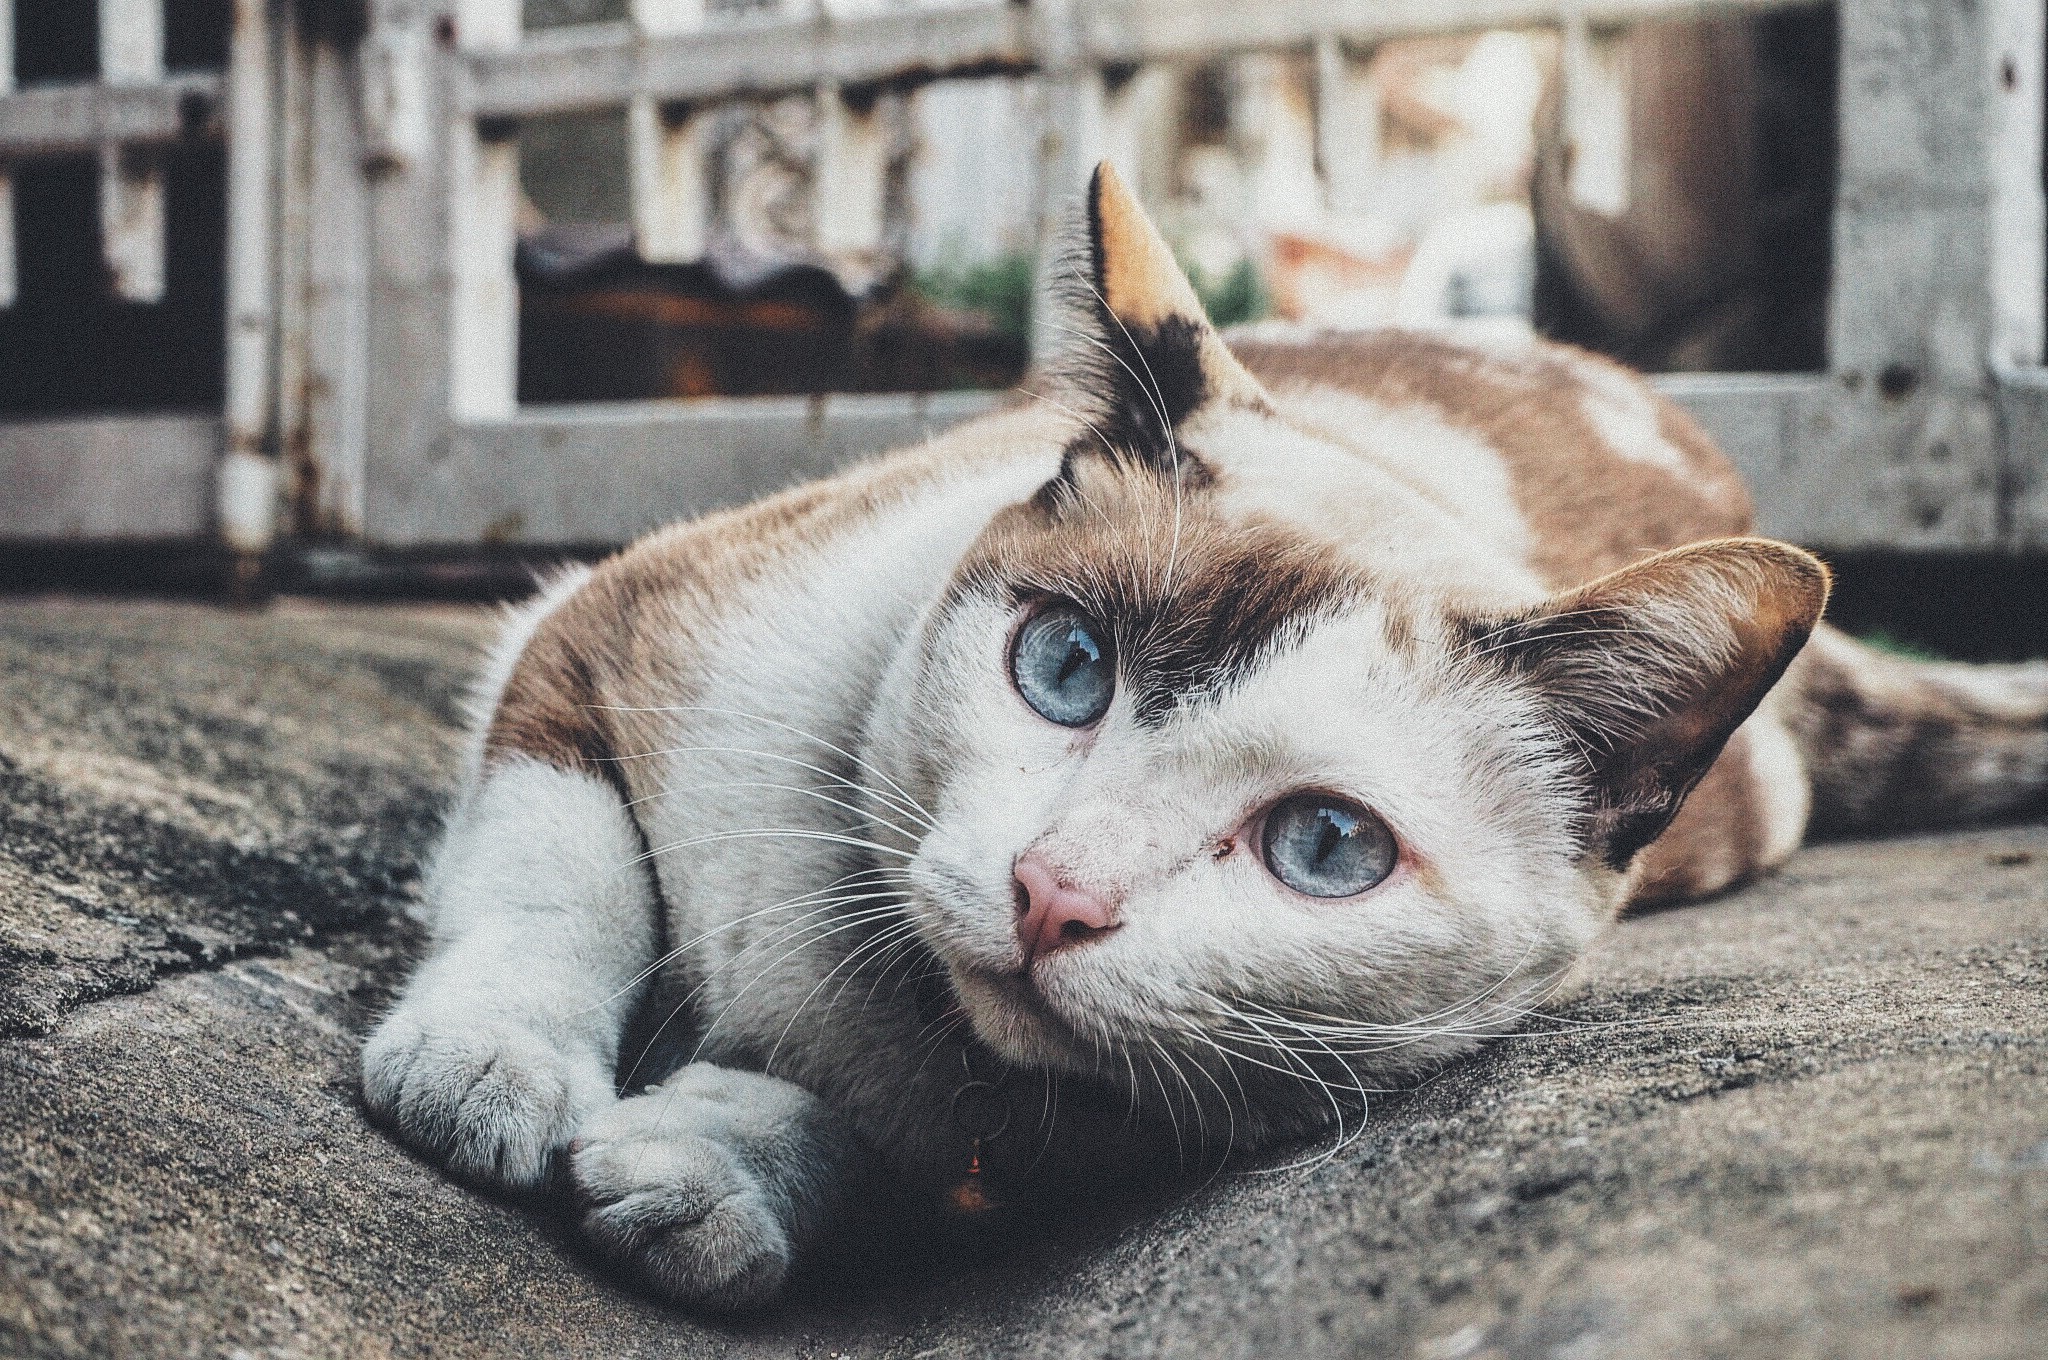 A kitty with beautiful eyes